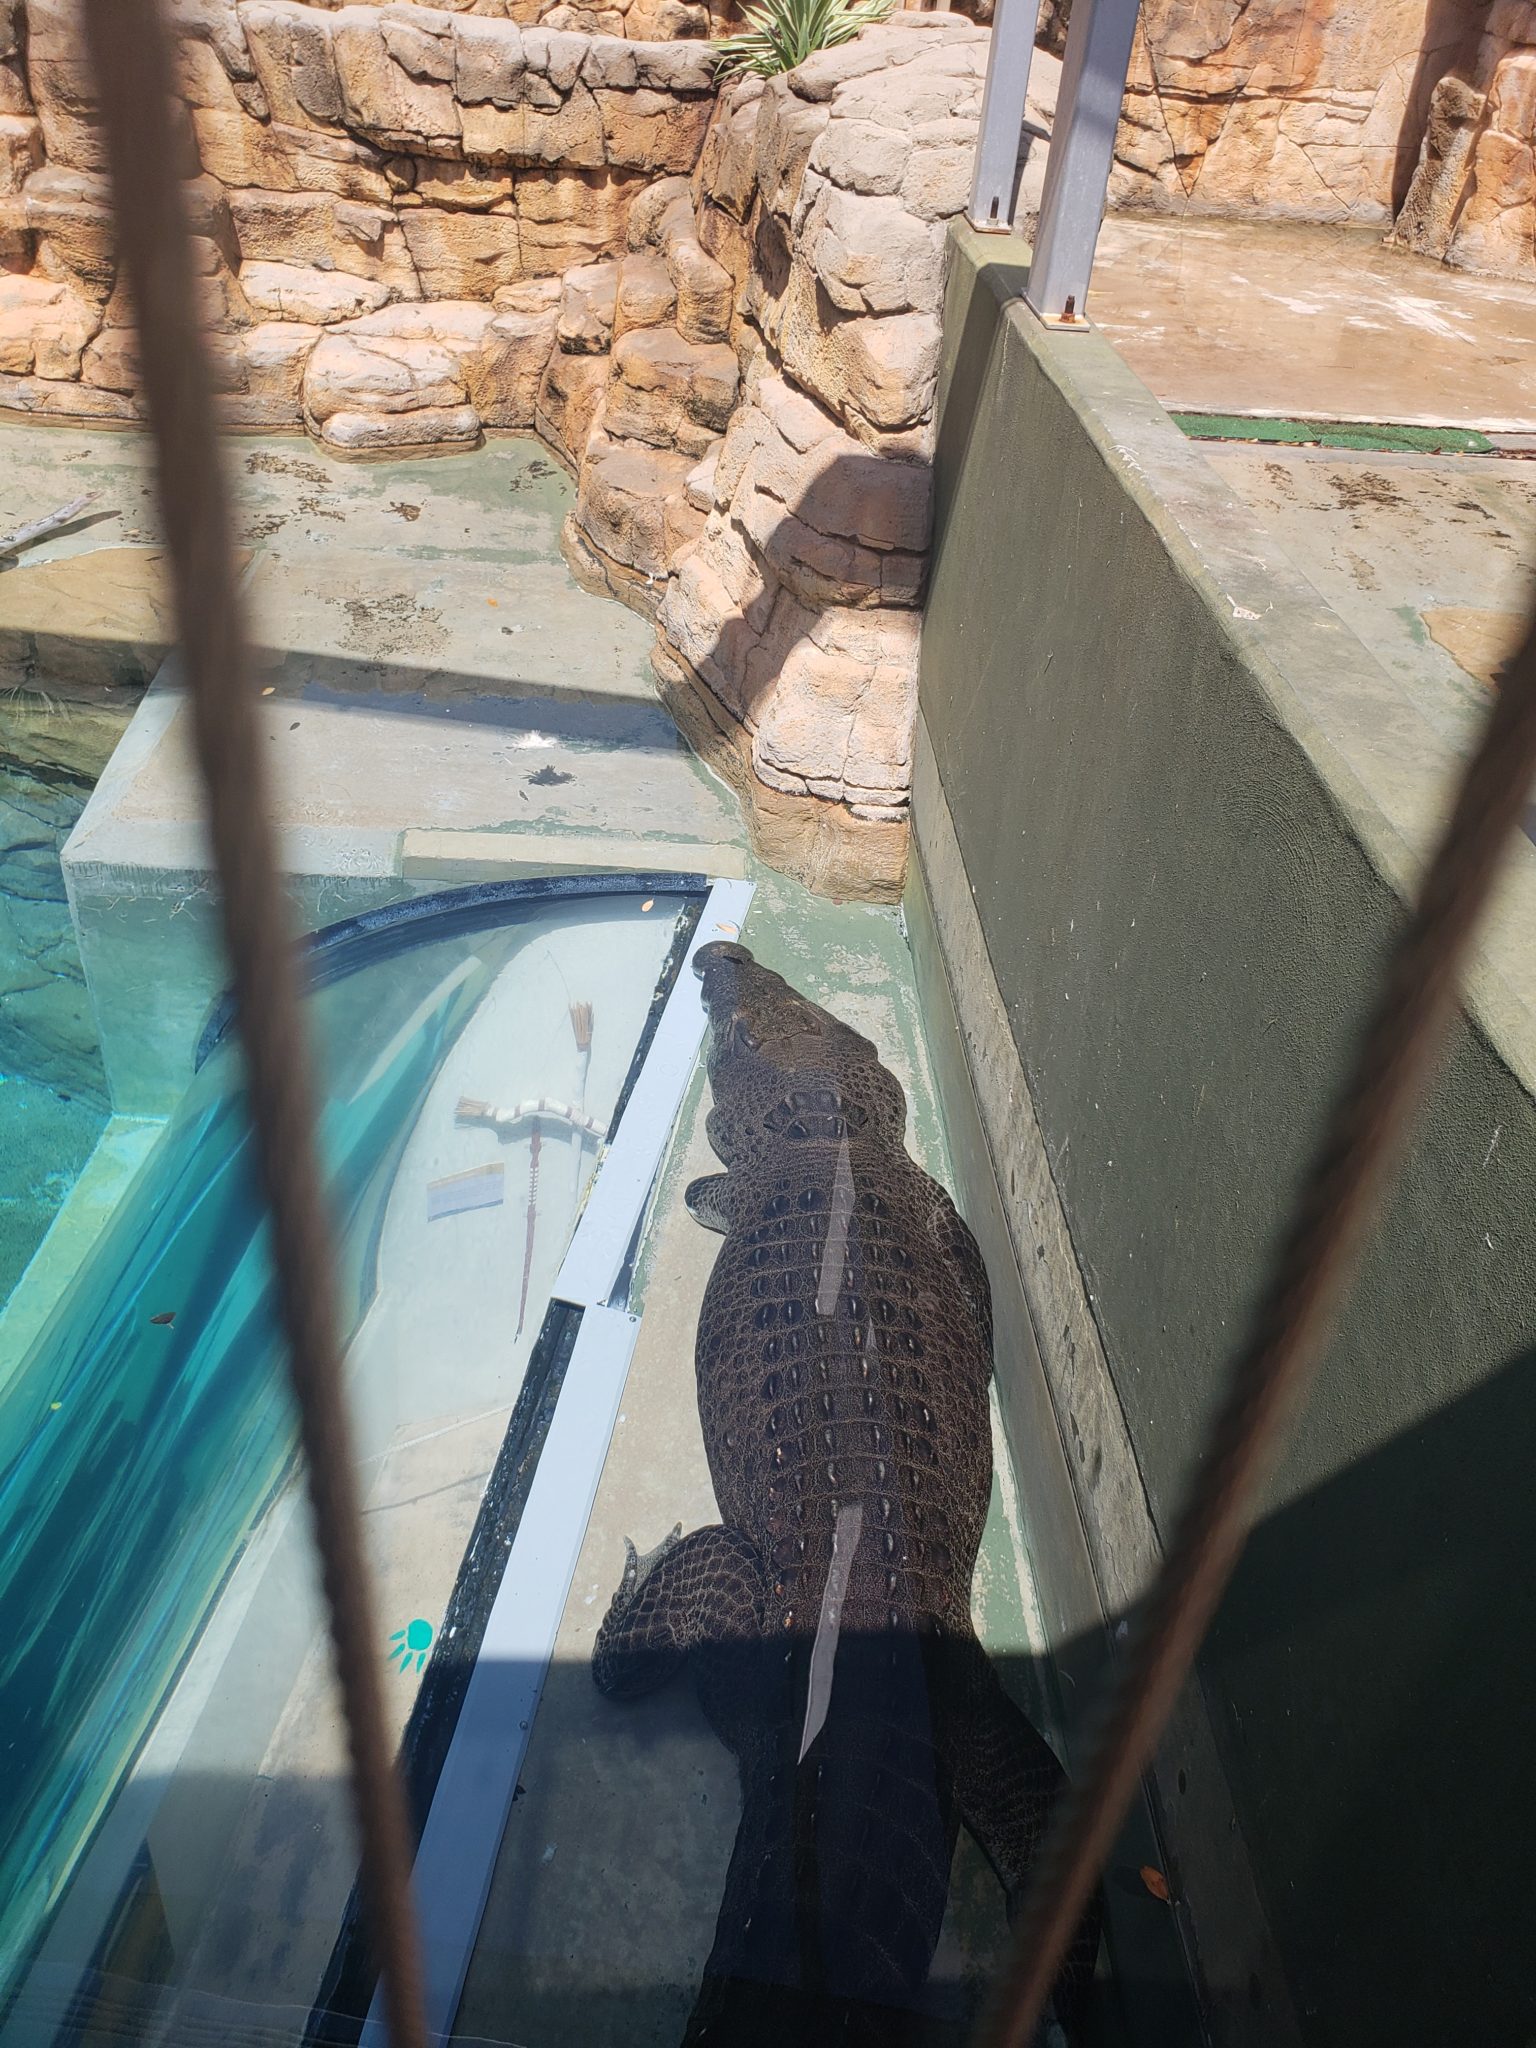 a large alligator in a cage